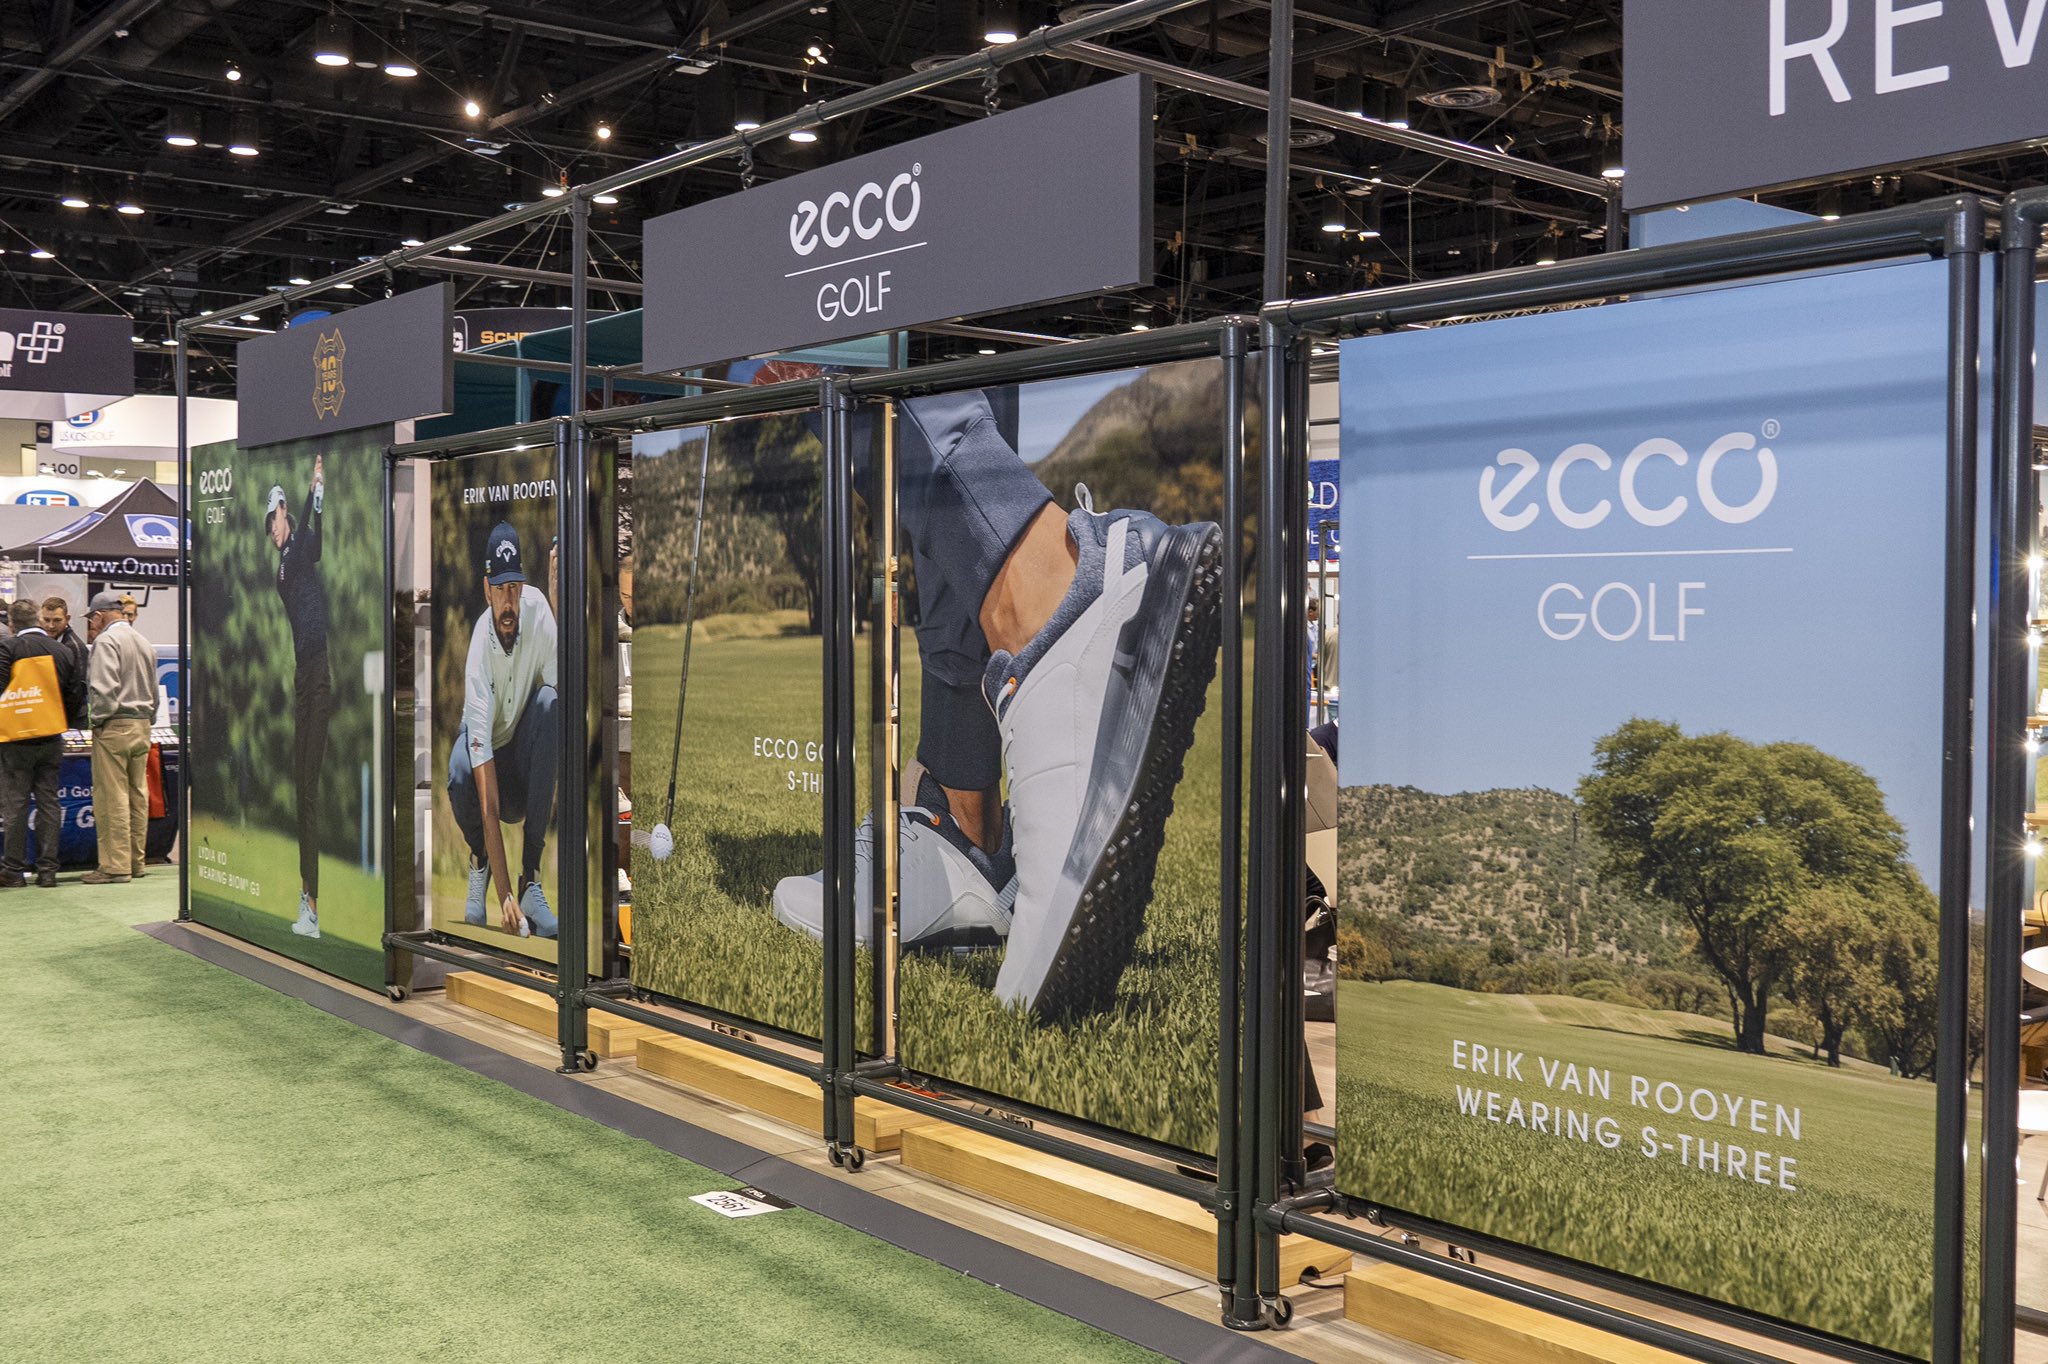 James Dyson Trickle fortvivlelse ECCO GOLF on Twitter: "Shoes, shoes, everywhere! If you're visiting the PGA  Merchandise Show today, make sure you come and see us on booth #2561 and  see what's new for 2020! #ECCOGOLF #